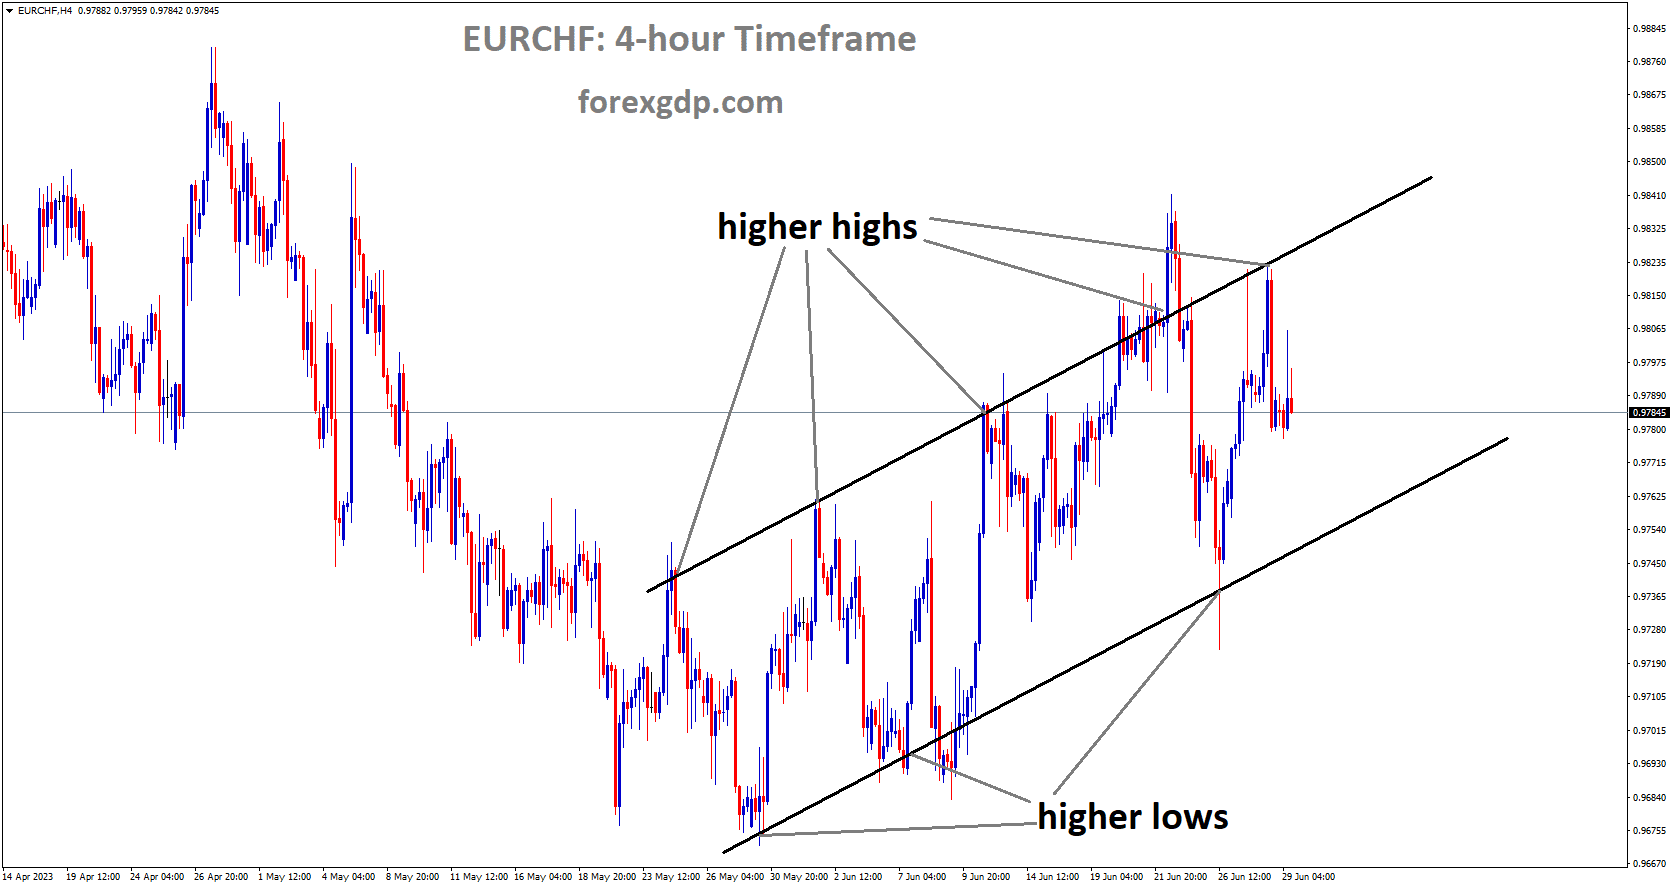 EURCHF is moving an Ascending channel and the market has fallen from the higher high area of the channel.